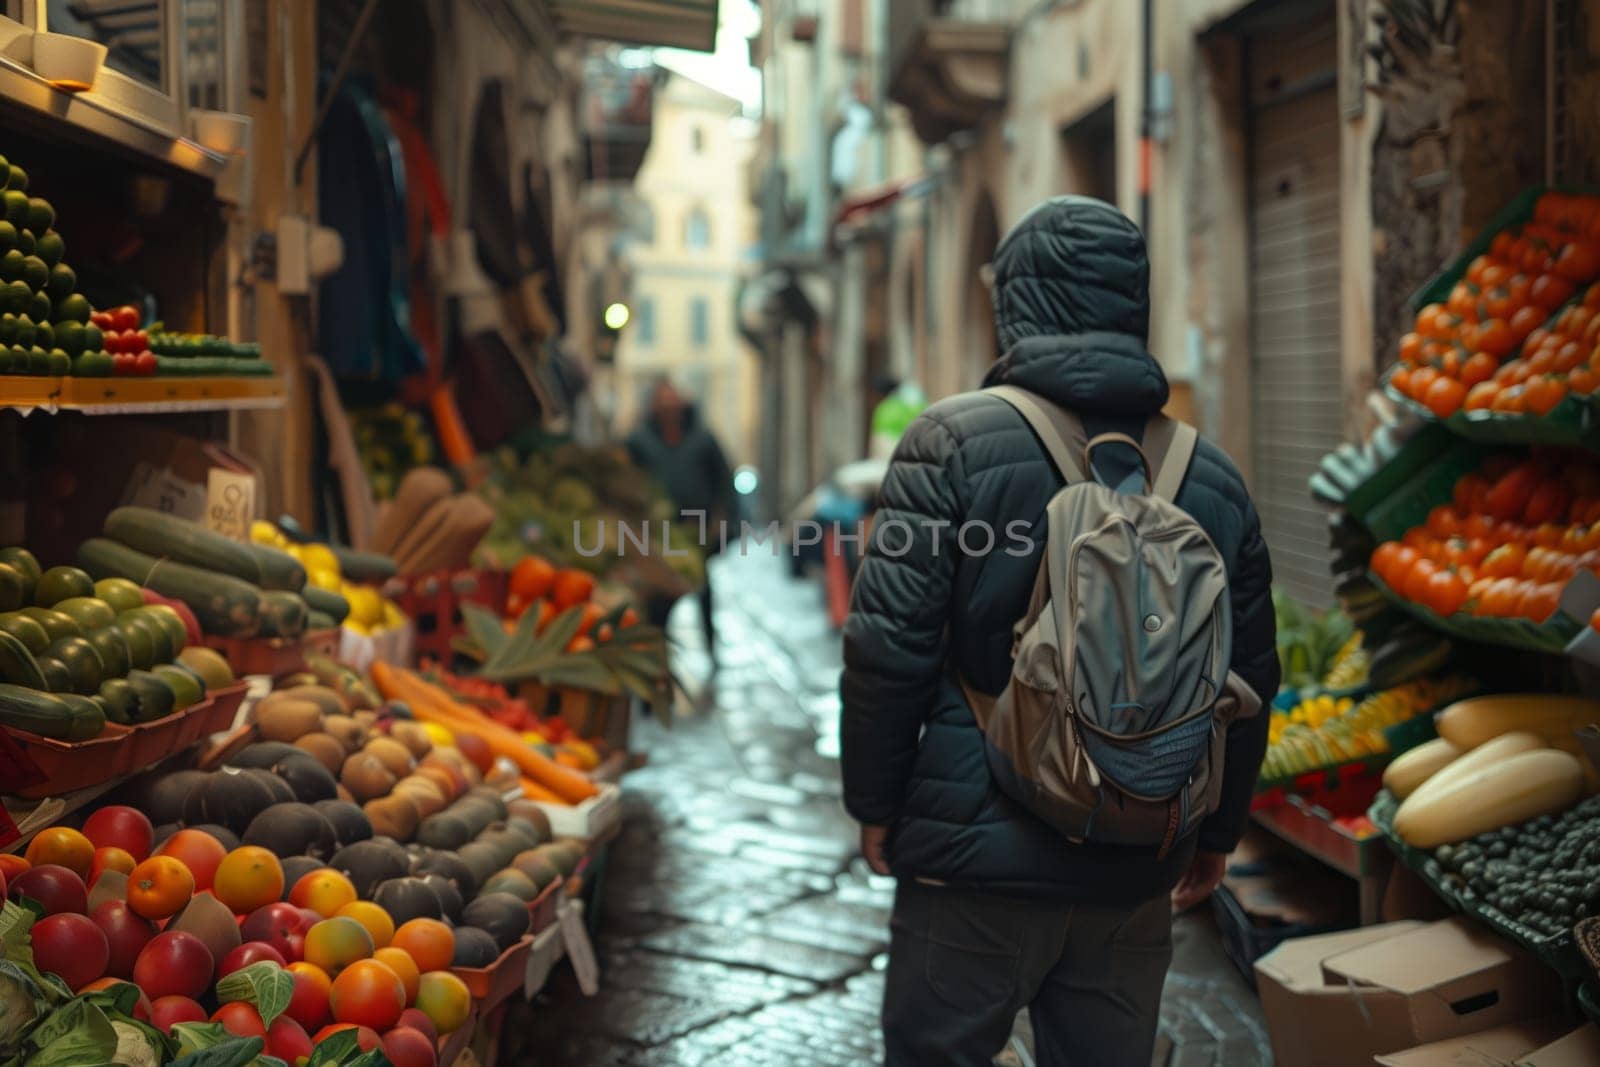 A man selling natural foods walks through the city market with a backpack by richwolf